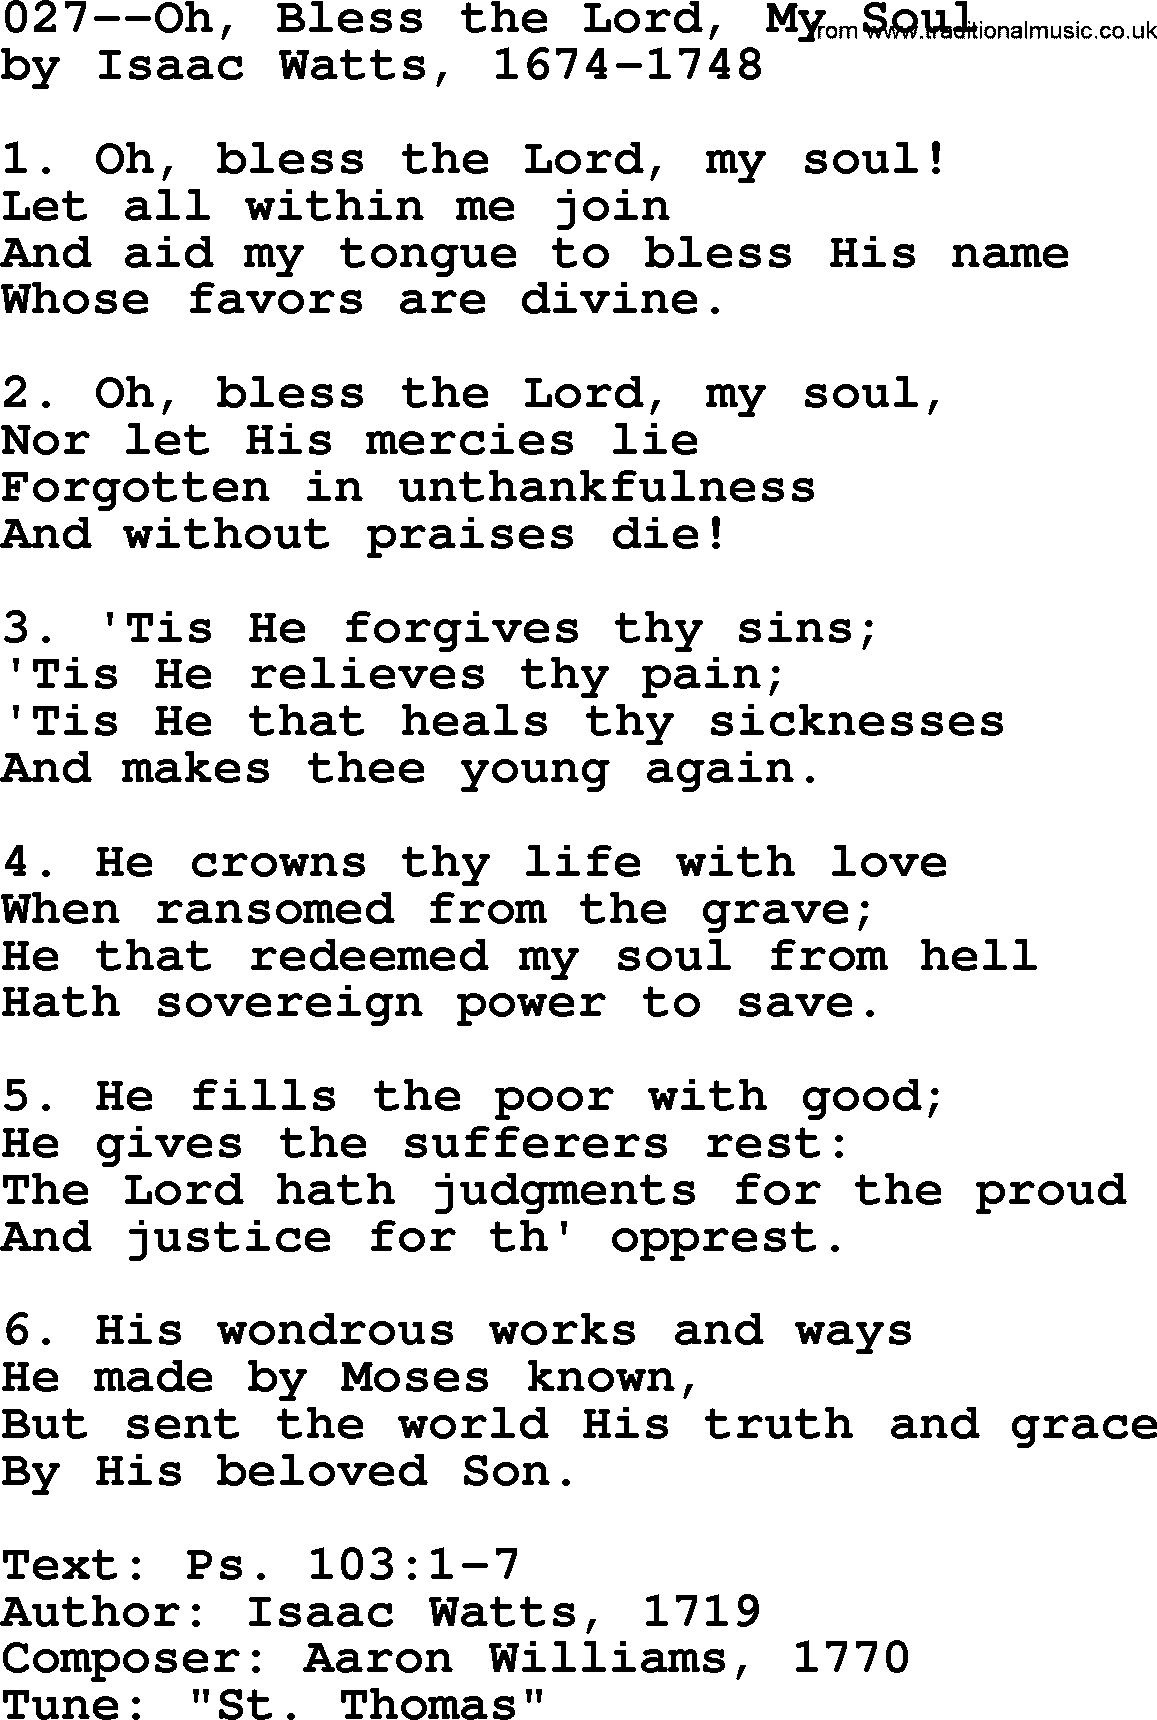 Lutheran Hymn: 027--Oh, Bless the Lord, My Soul.txt lyrics with PDF